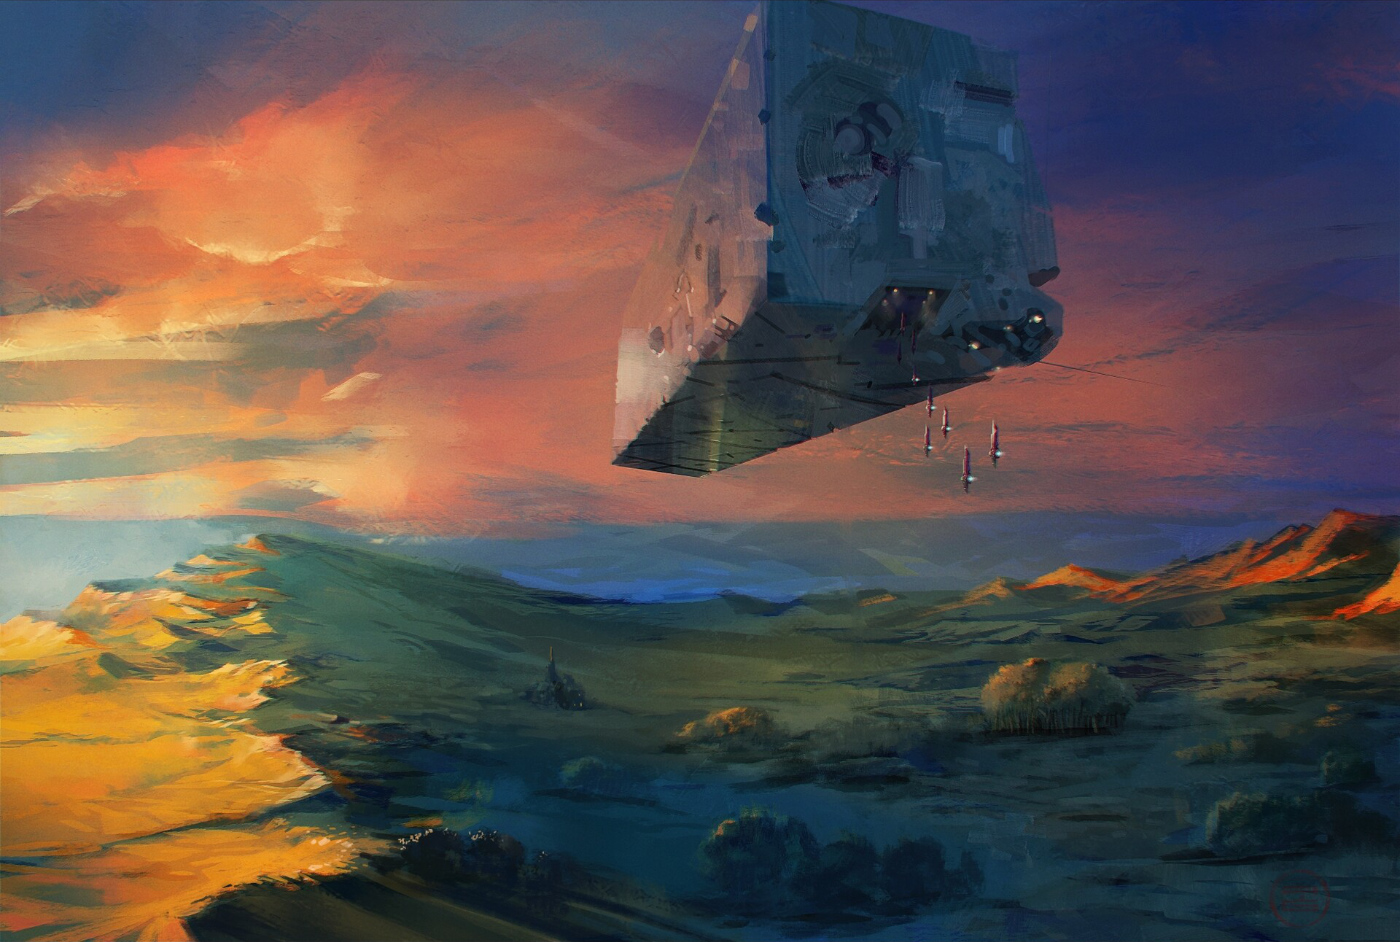 An art piece showing a block of concrete flying above land on an alien planet.